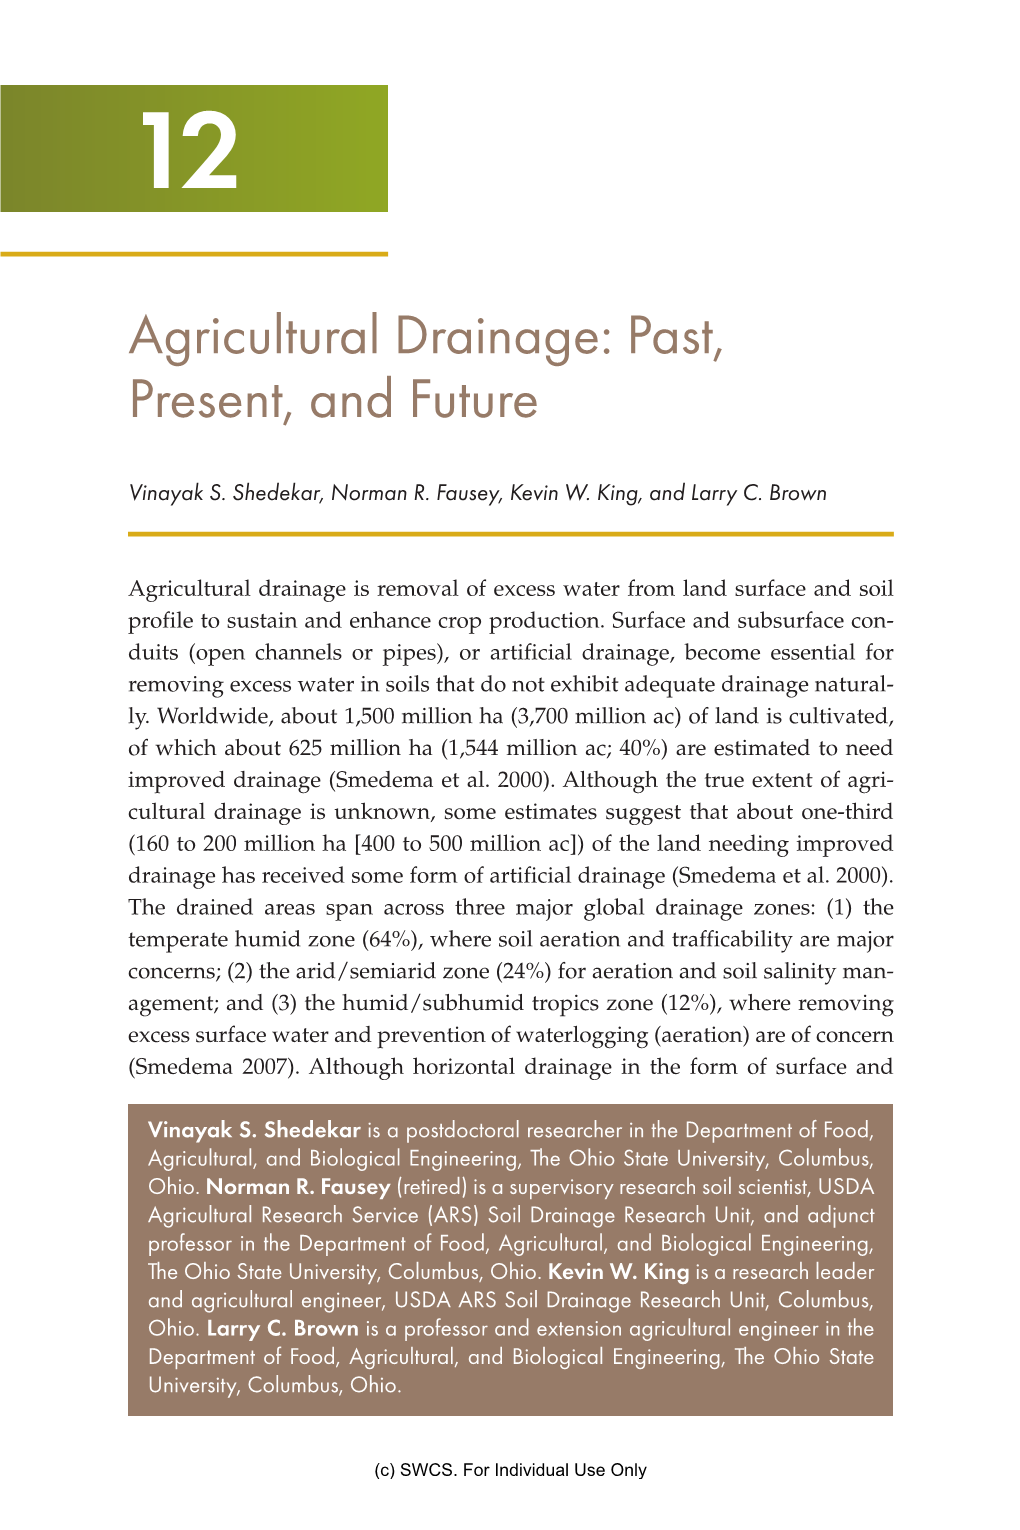 Chapter 12. Agricultural Drainage: Past, Present, and Future